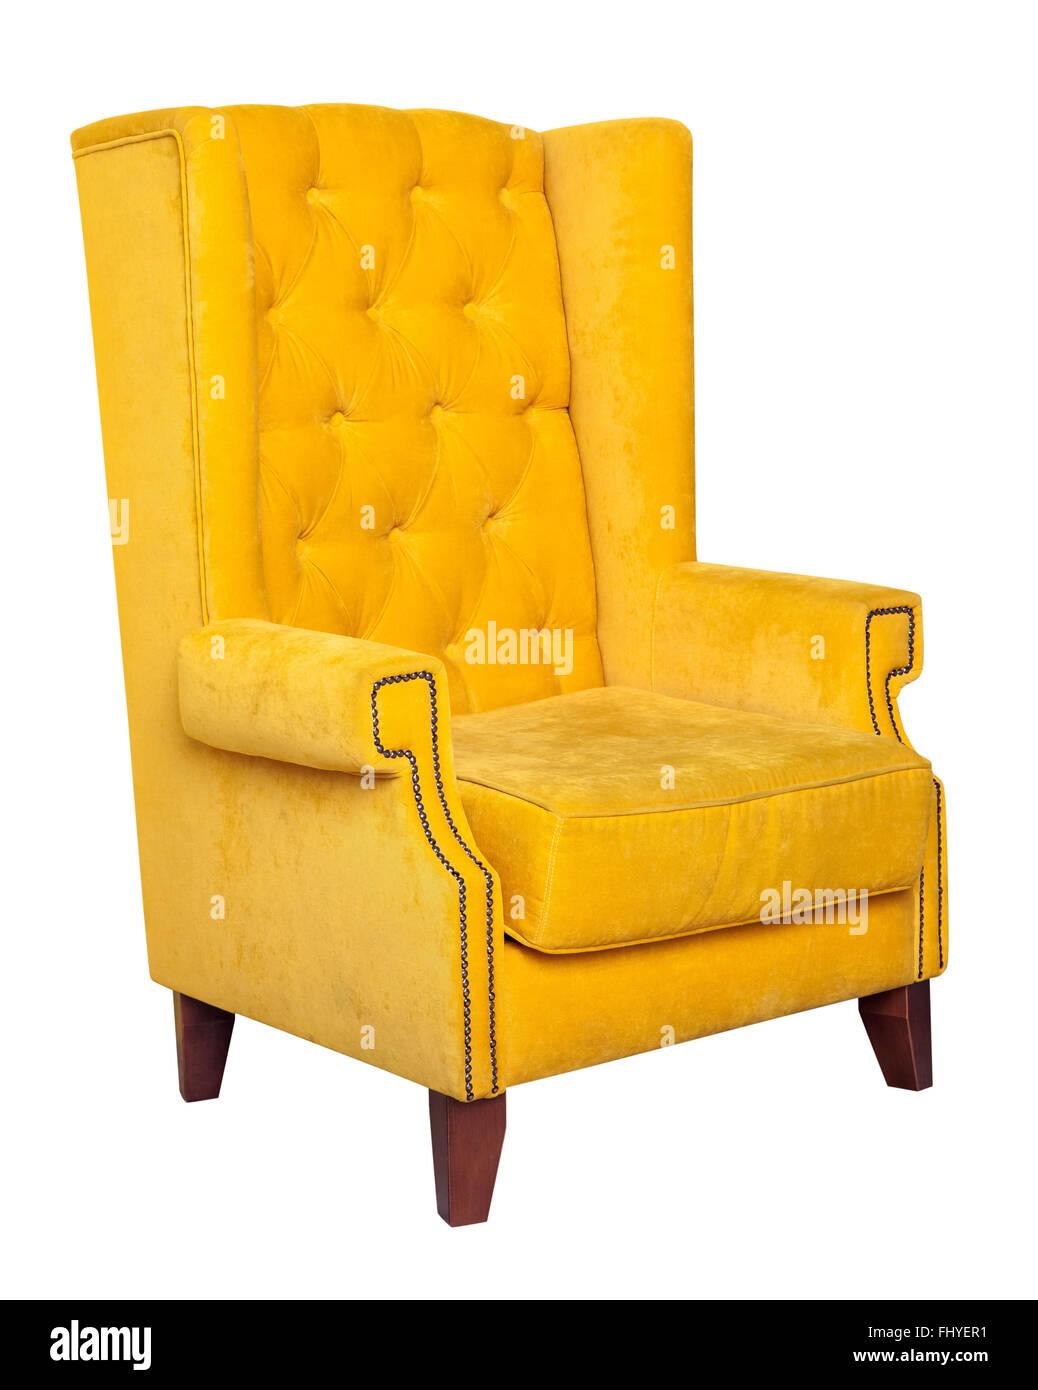 Yellow textile chair isolated Stock Photo